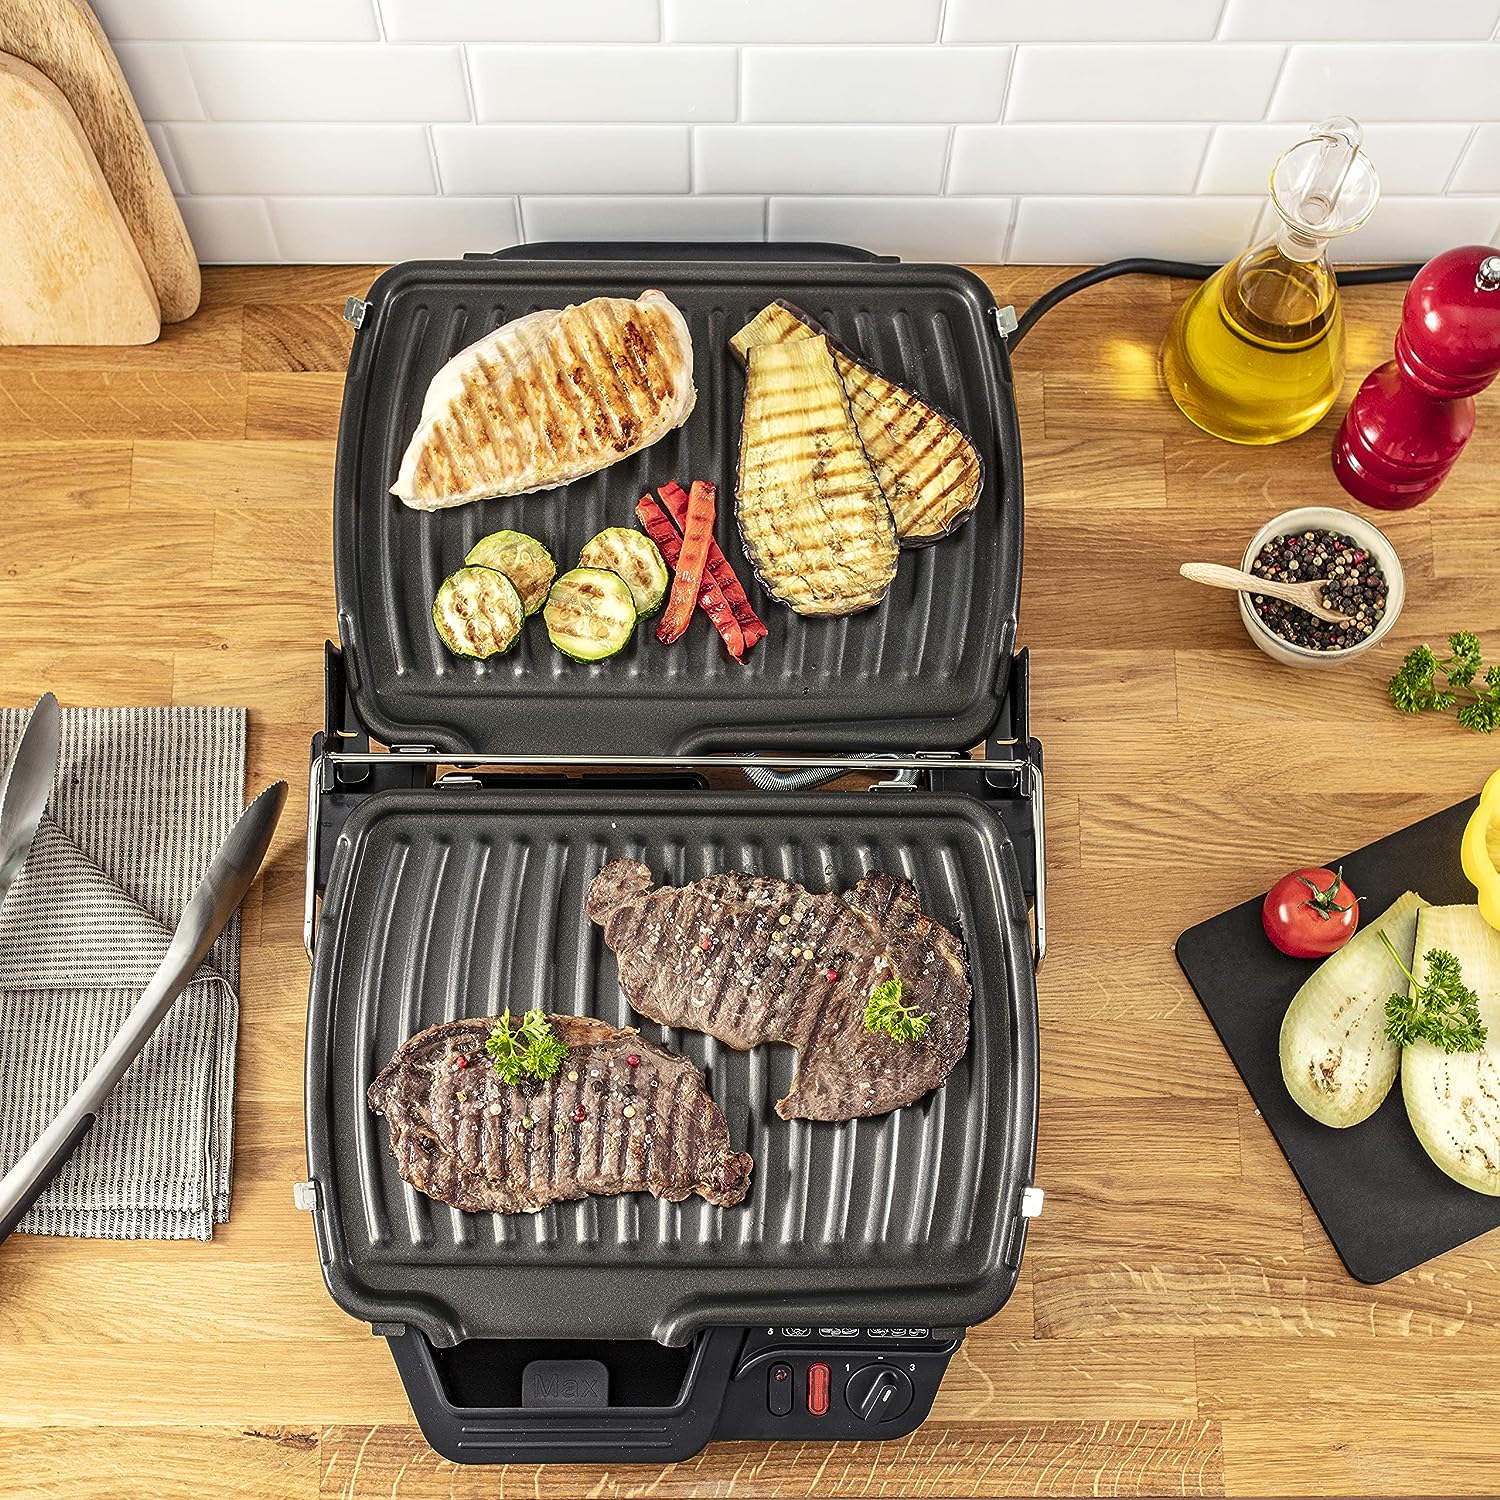 Tefal Electric grill ultracompact grill easily stored